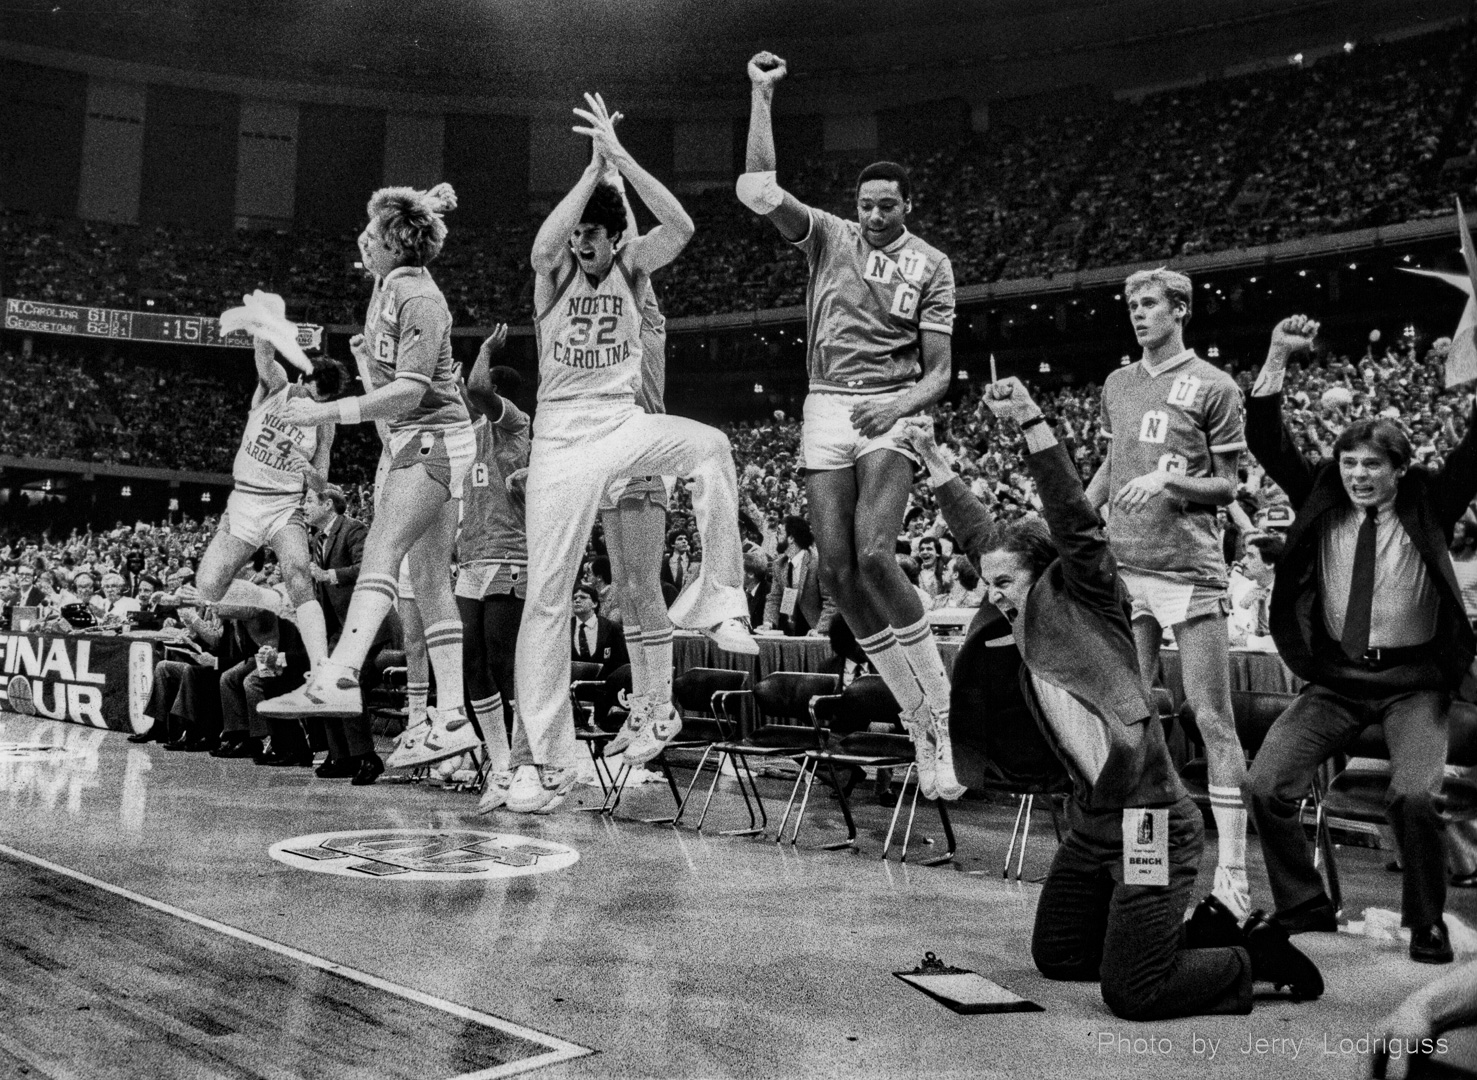 The North Carolina bench erupts with joy with 15 seconds left after Michael Jordan hit the game-winning jump shot to beat Georgetown and claim the 1982 NCAA basketball national championship.